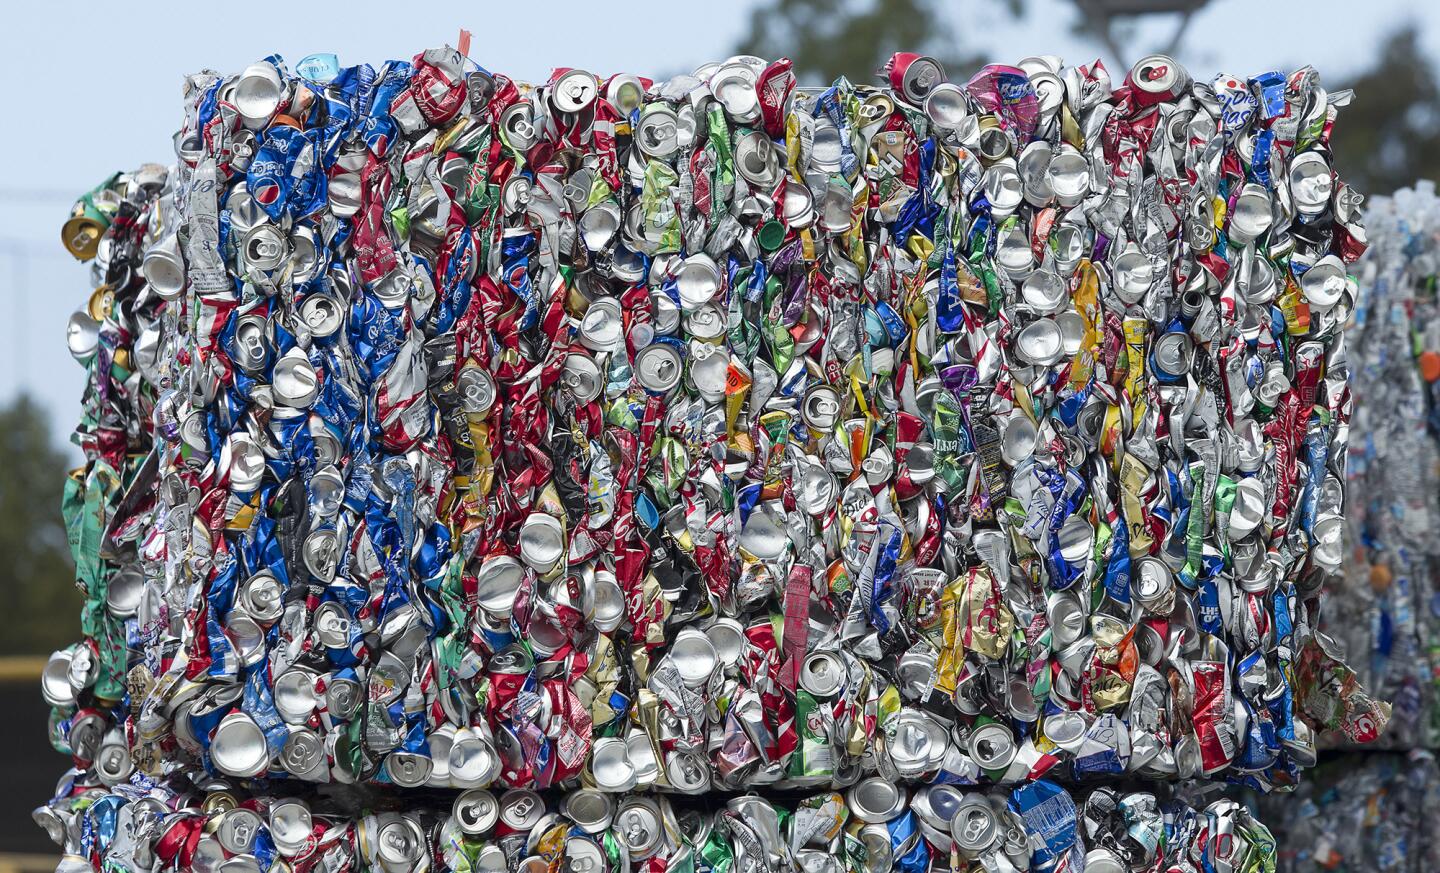 New OCC Recycling Center opens with ceremony